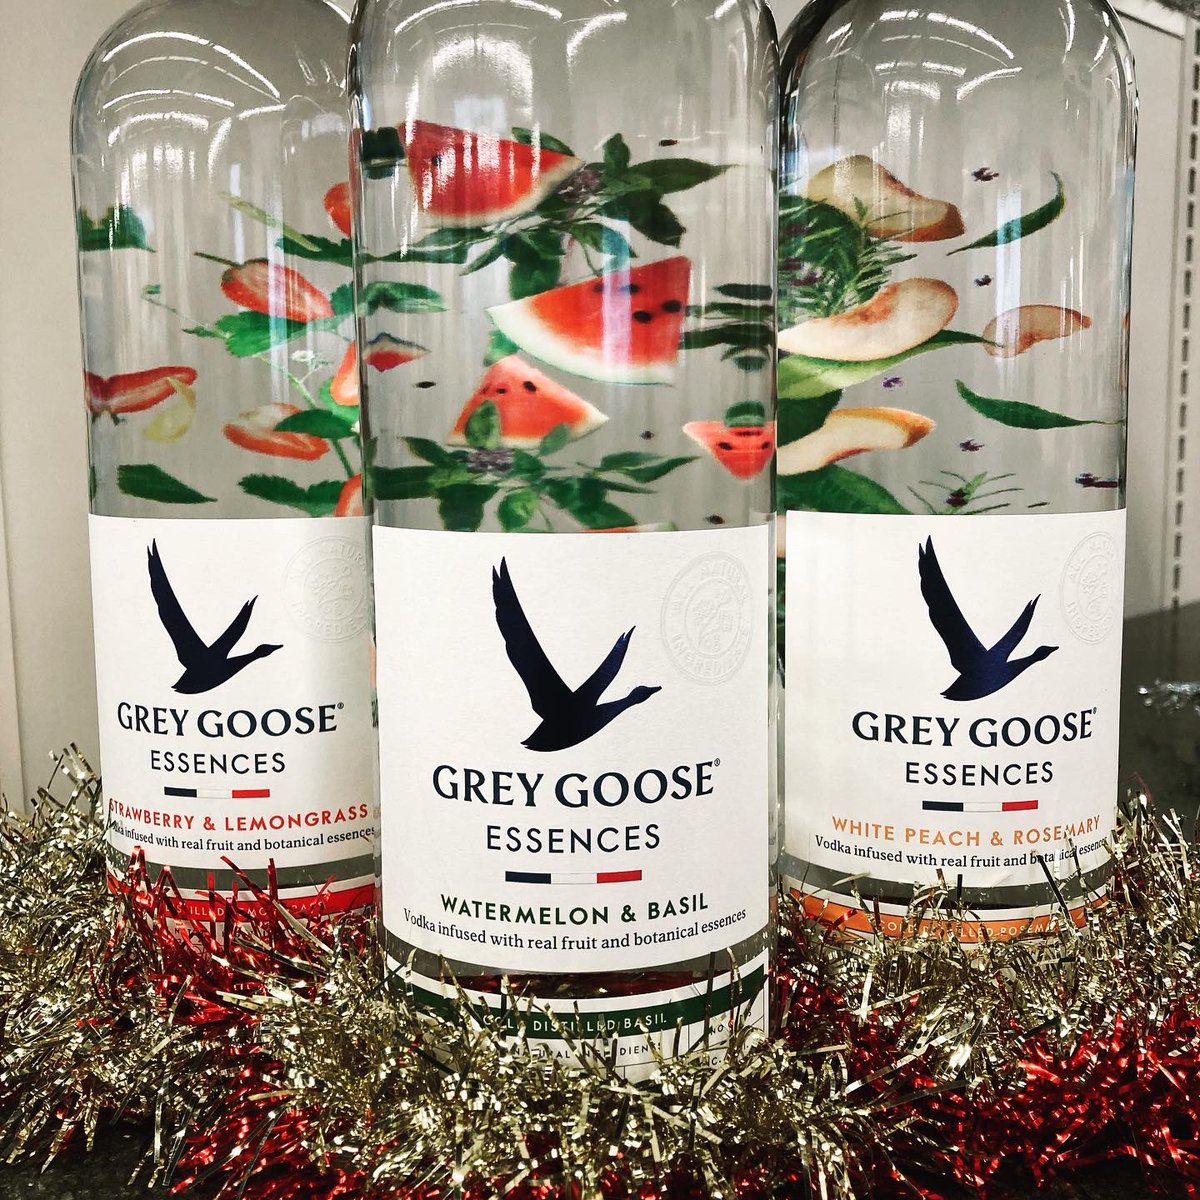 Stop in today between 2 and 5 pm and try out some of Black Button Distilling’s amazing products!!! We also have Grey Goose Essences vodka here with three amazing flavors! Something for everyone on your list. #blackbuttondistilling #greygooseessences #gobills #whatsyouroutlet